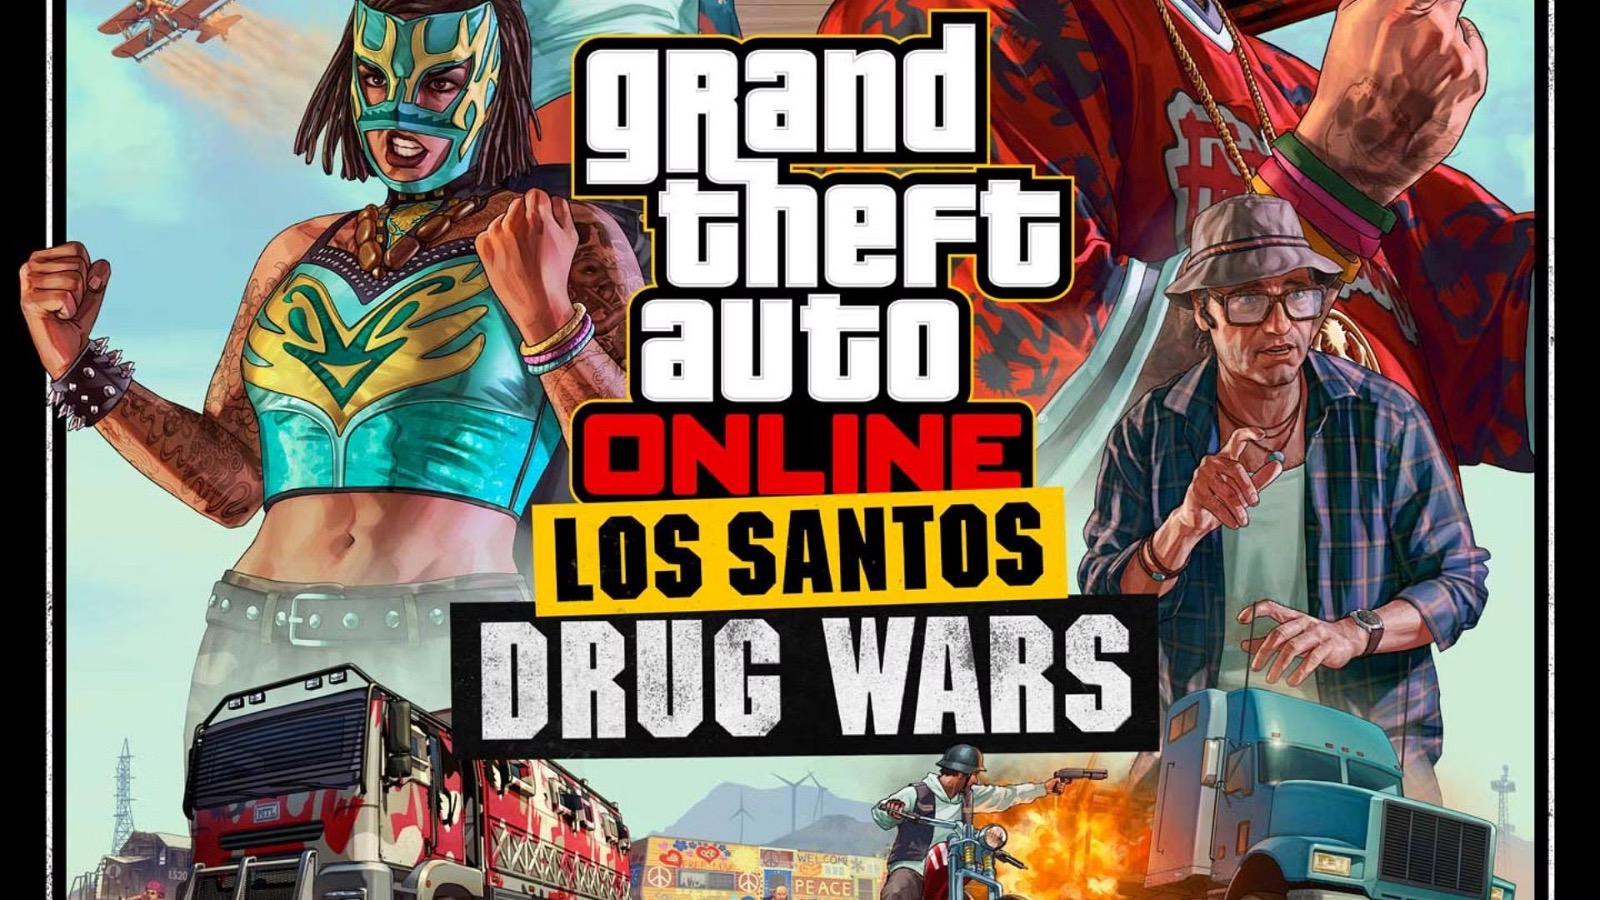 GTA Online "Los Santos Drug Wars" expansion" is now available